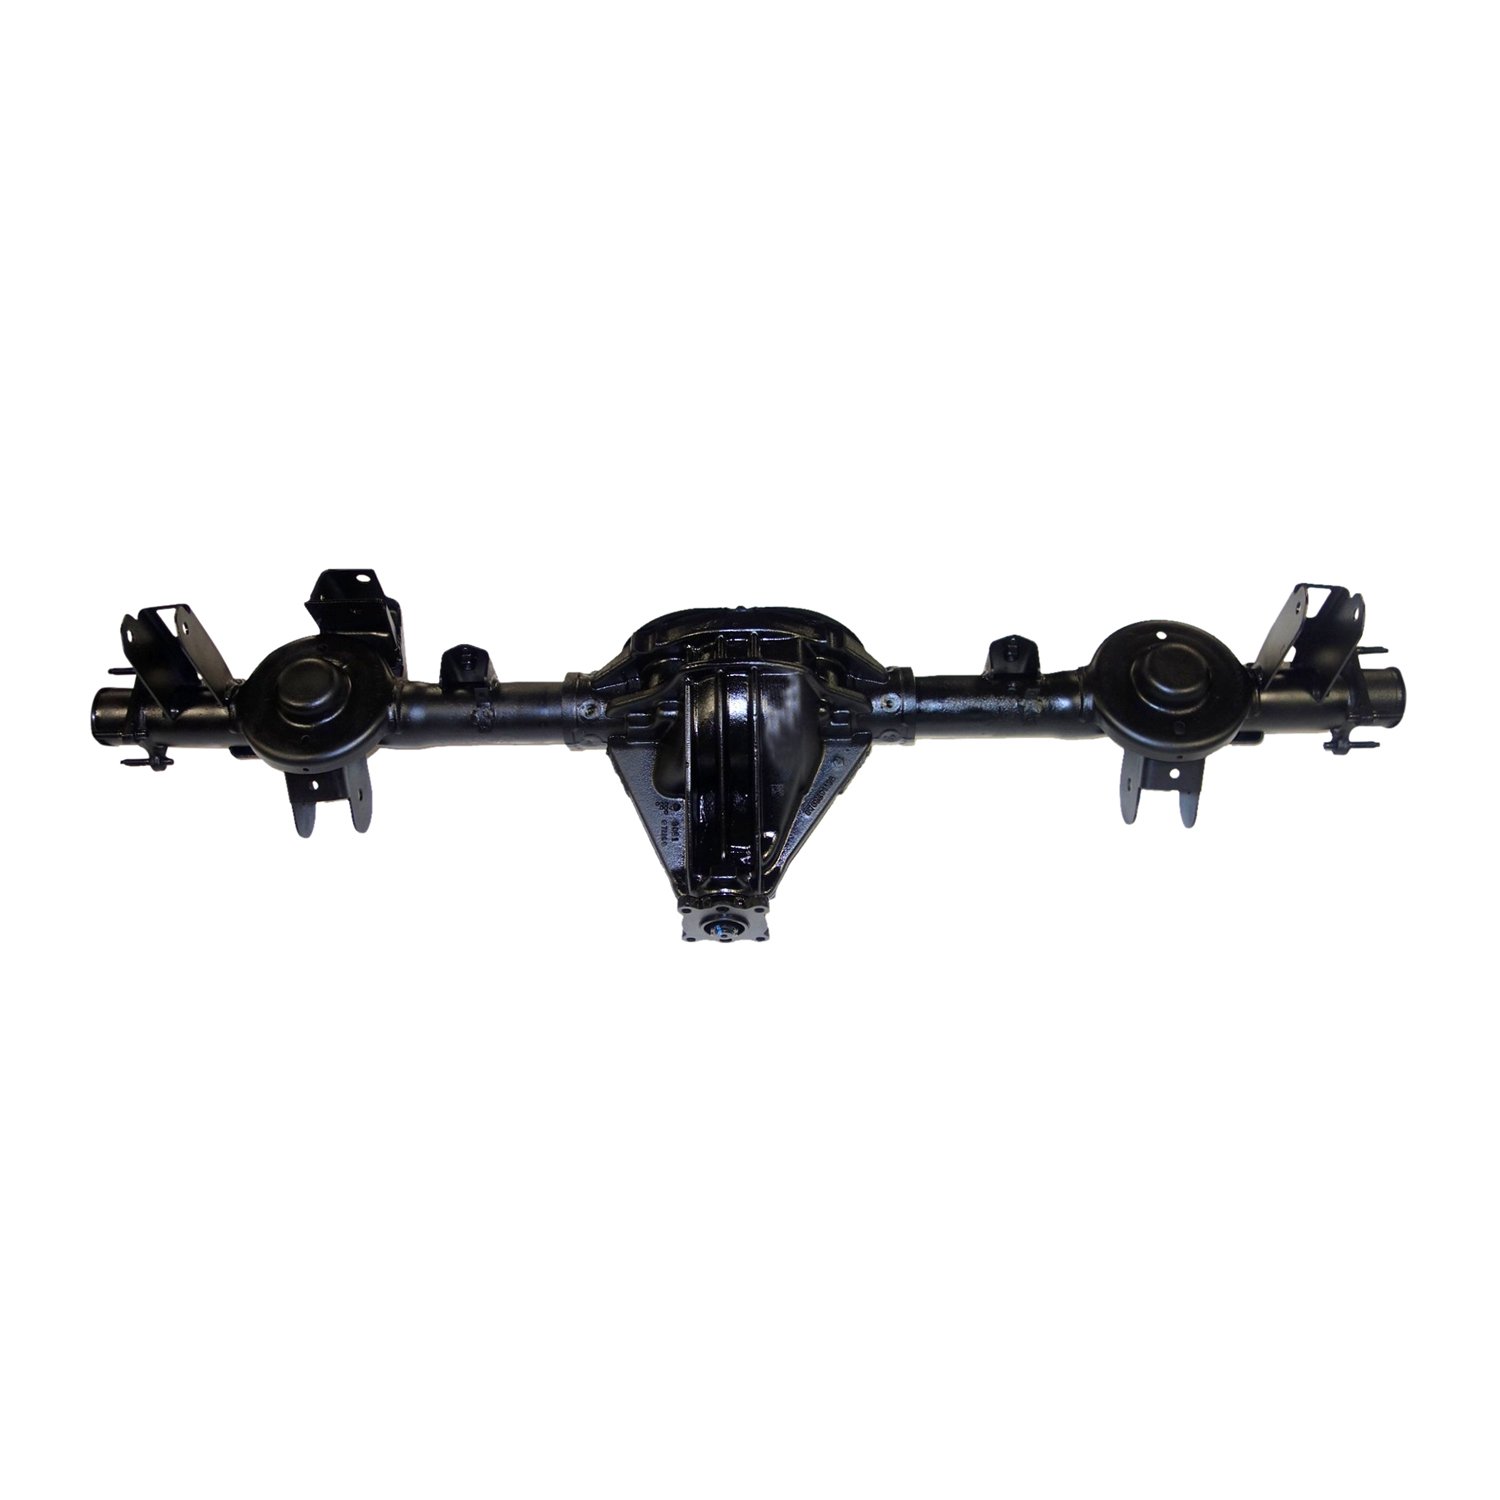 Remanufactured Axle Assembly for Chy 8.25" 07-12 Nitro & Liberty 3.73 Ratio, Posi